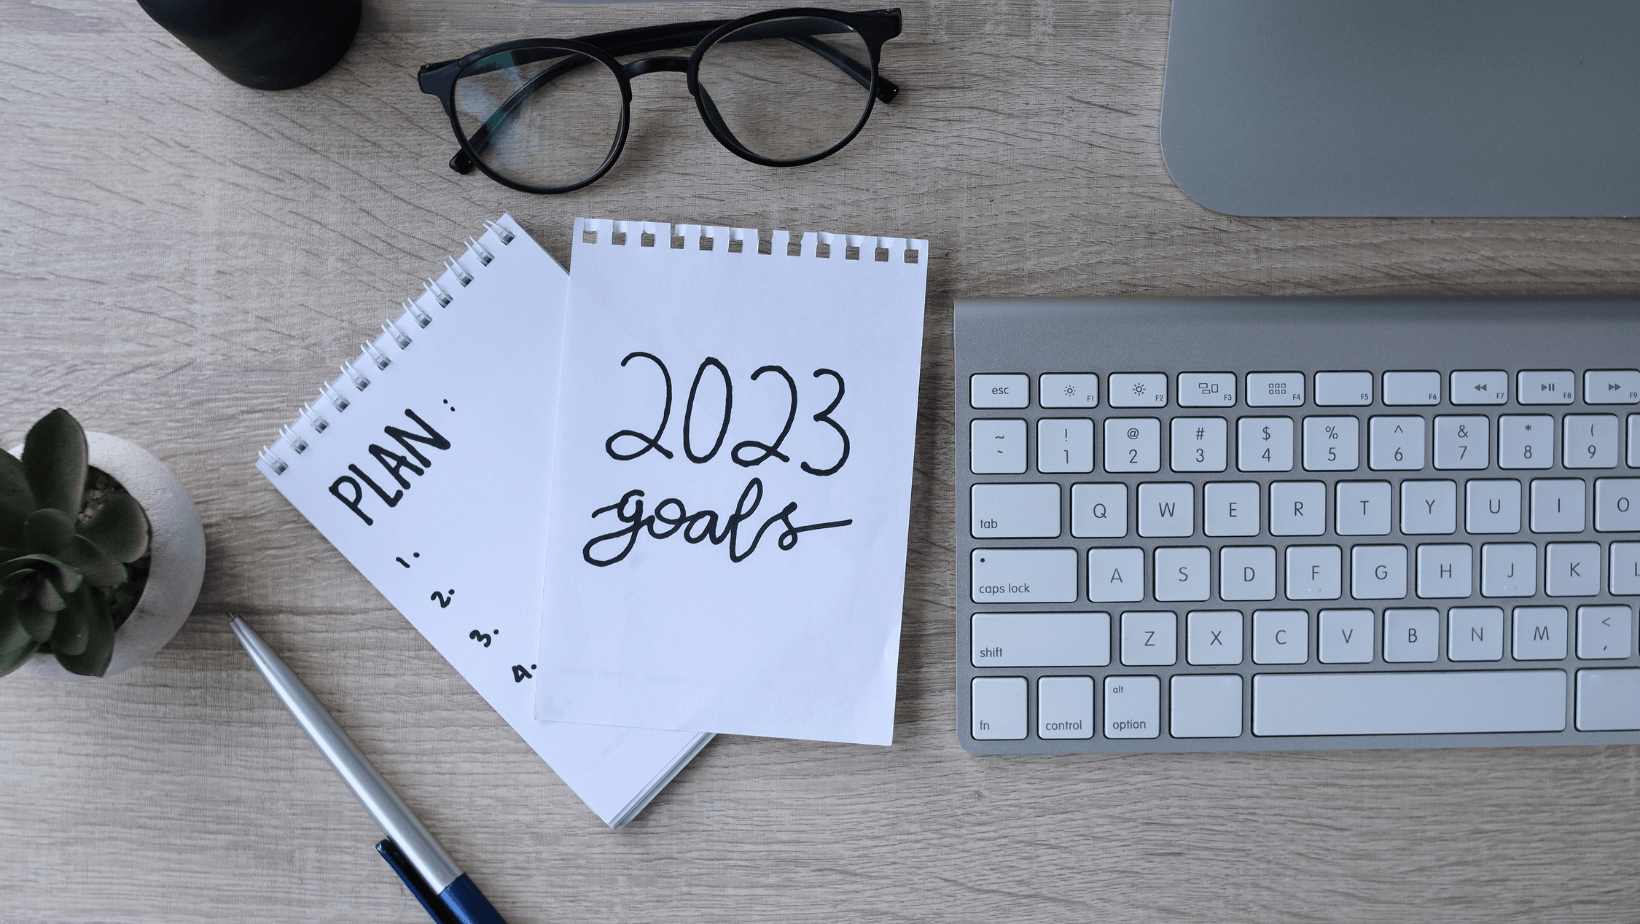 A notepad with the words `` plan 2023 goals '' written on it is on a desk next to a keyboard and glasses.